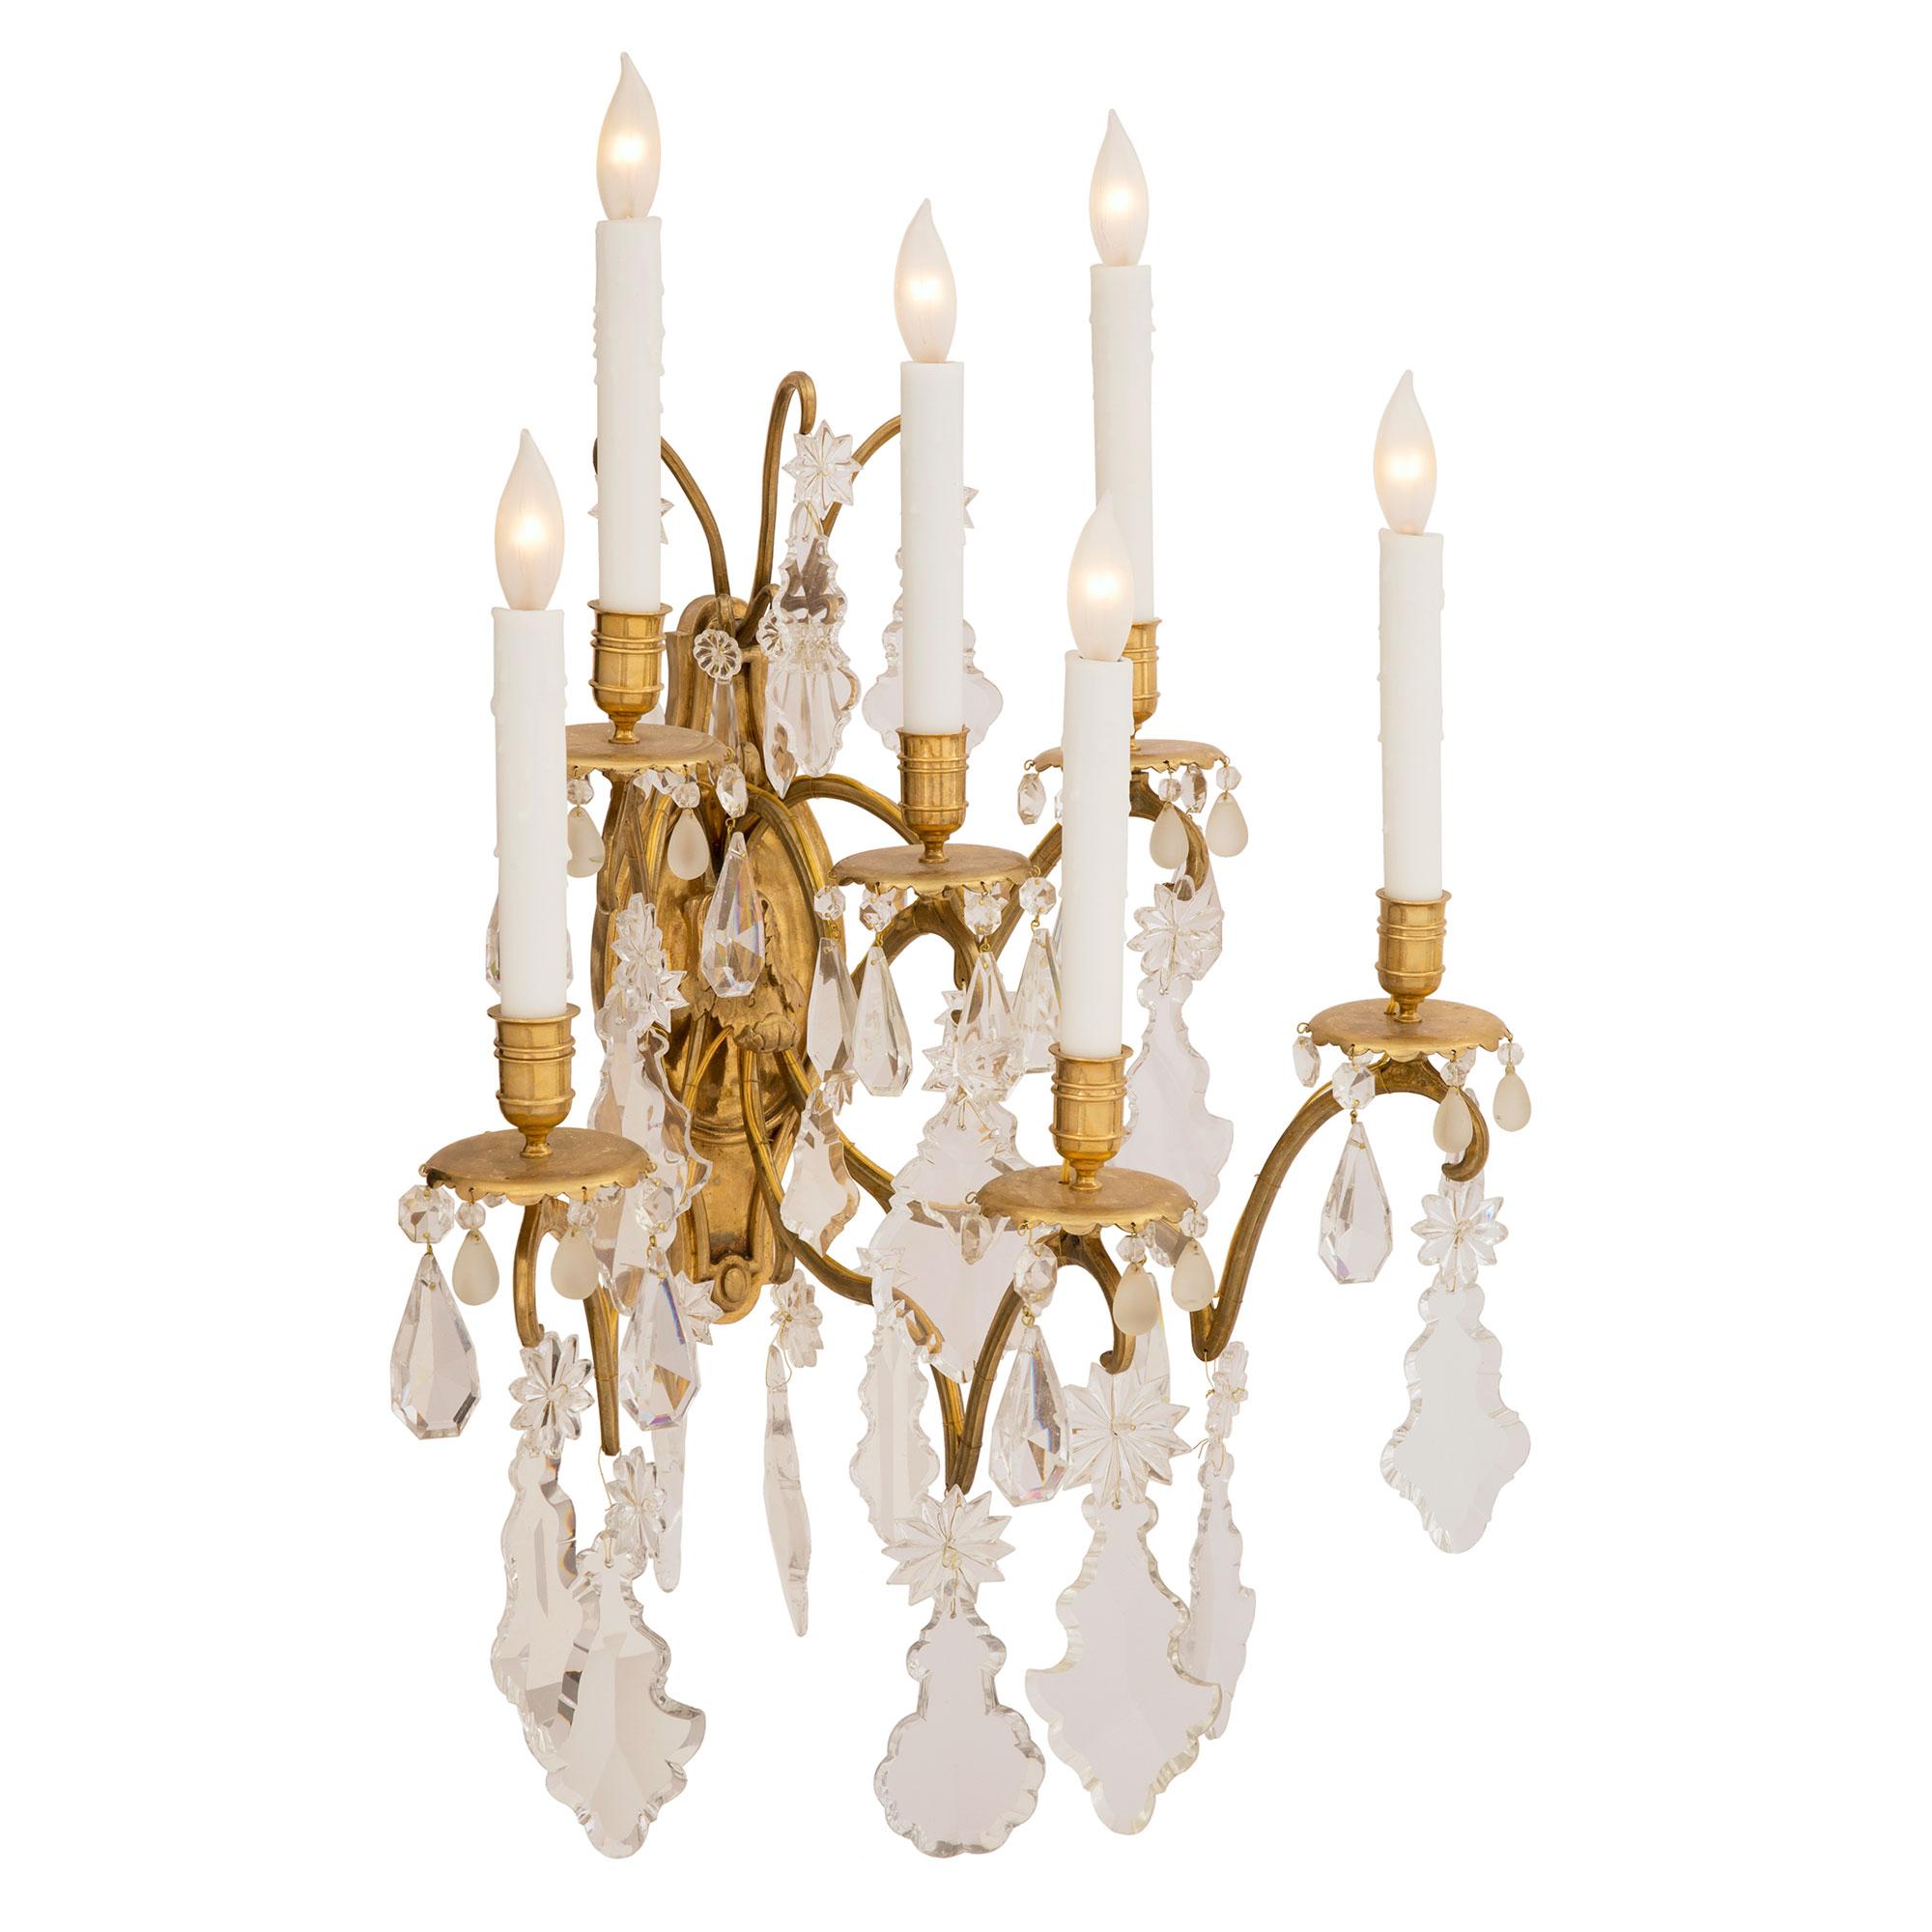 A most elegant pair of French 19th century Louis XVI st. ormolu, Baccarat crystal and frosted crystal six arm sconces. Each sconce is centered by a lovely mottled elongated back plate with a richly chased acanthus leaf from where the six uniquely